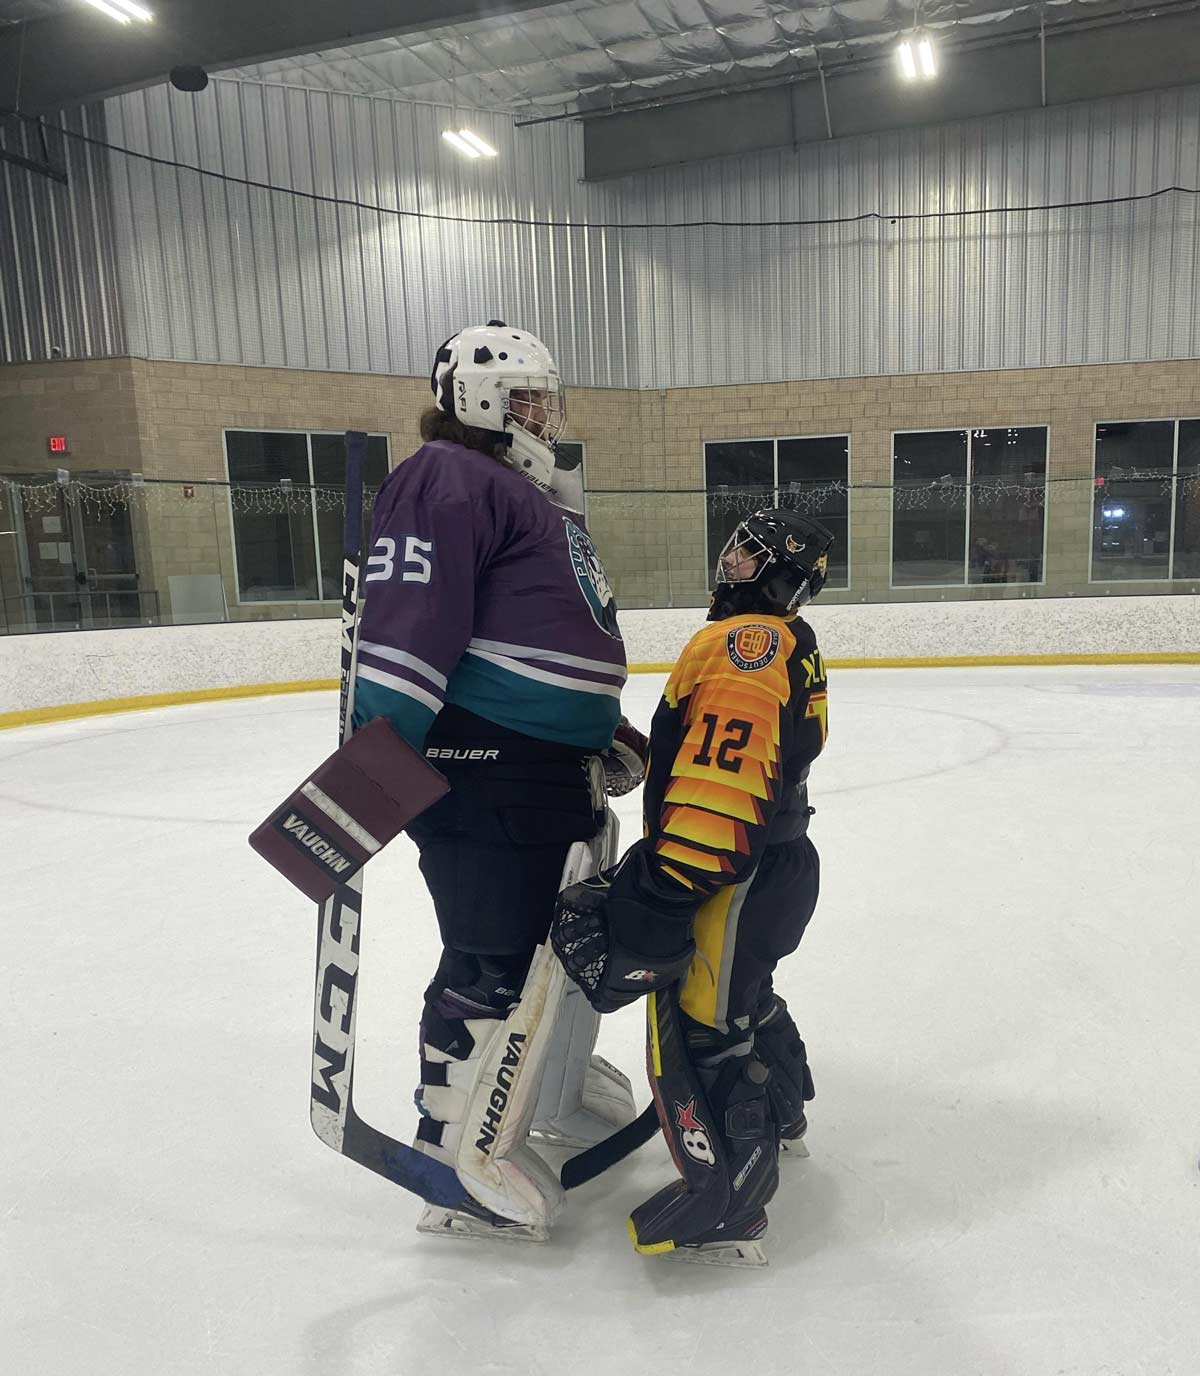 The size difference between me and my opposing goalie the other night. I’m 5’3 and he’s 6’7